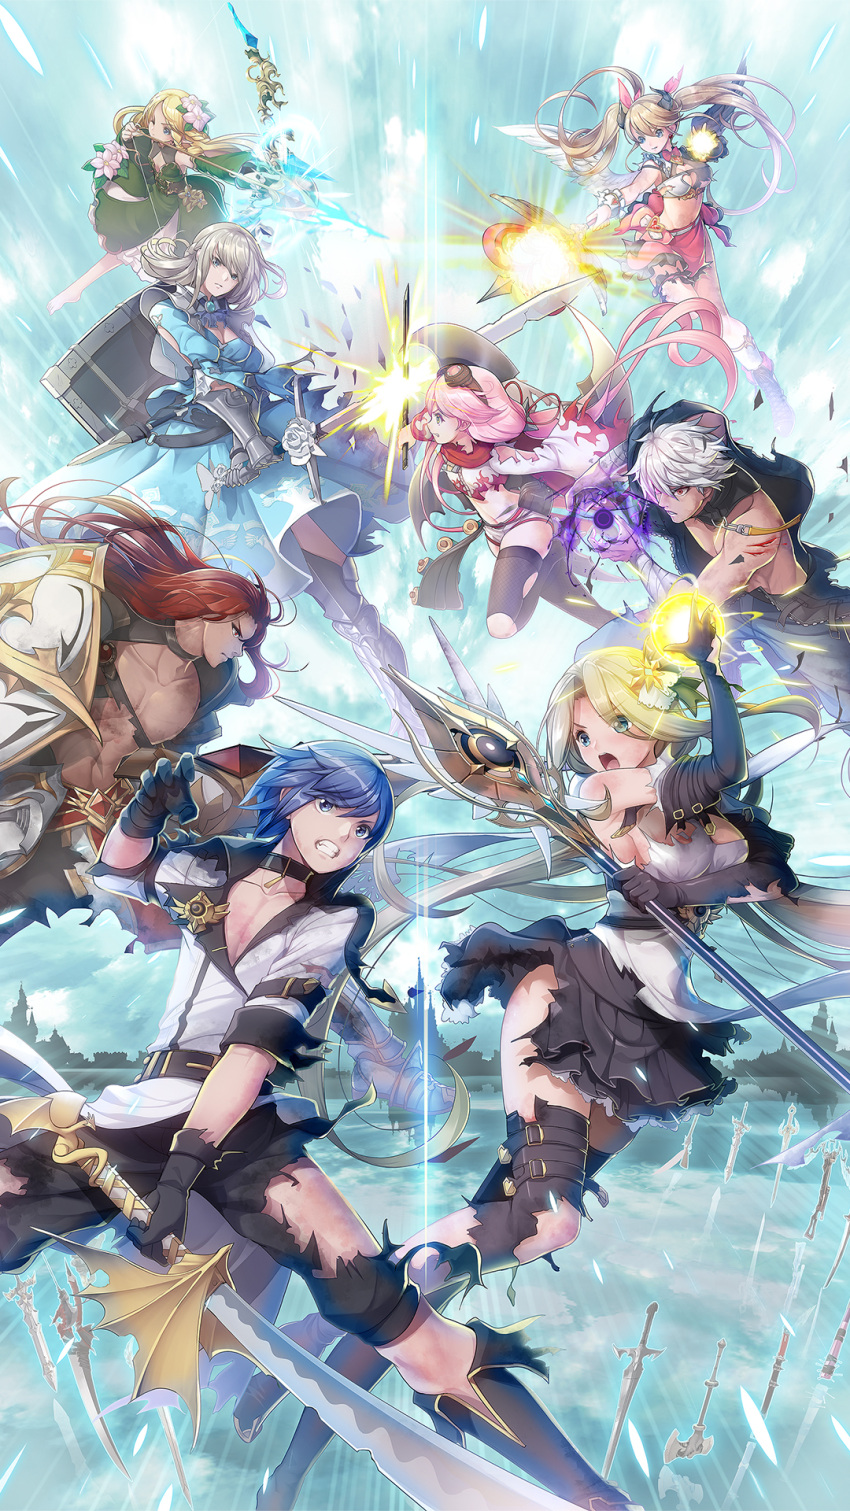 4boys 5girls arrow_(projectile) black_gloves black_legwear bleeding blonde_hair blood blue_eyes blue_hair bow bow_(weapon) braid broken brown_hair cuts dark_skin dark_skinned_male day eye_contact flower gauntlets gloves goggles goggles_on_head gun hair-bow hair_flower hair_ornament hand_up highres holding holding_bow_(weapon) holding_shield holding_staff holding_sword holding_weapon injury koflif long_hair looking_at_another magic midriff multiple_boys multiple_girls navel orb original outdoors pink_bow pink_hair planted_weapon red_eyes redhead shield silver_hair staff sword thigh_strap torn_clothes twintails violet_eyes weapon white_wings wings